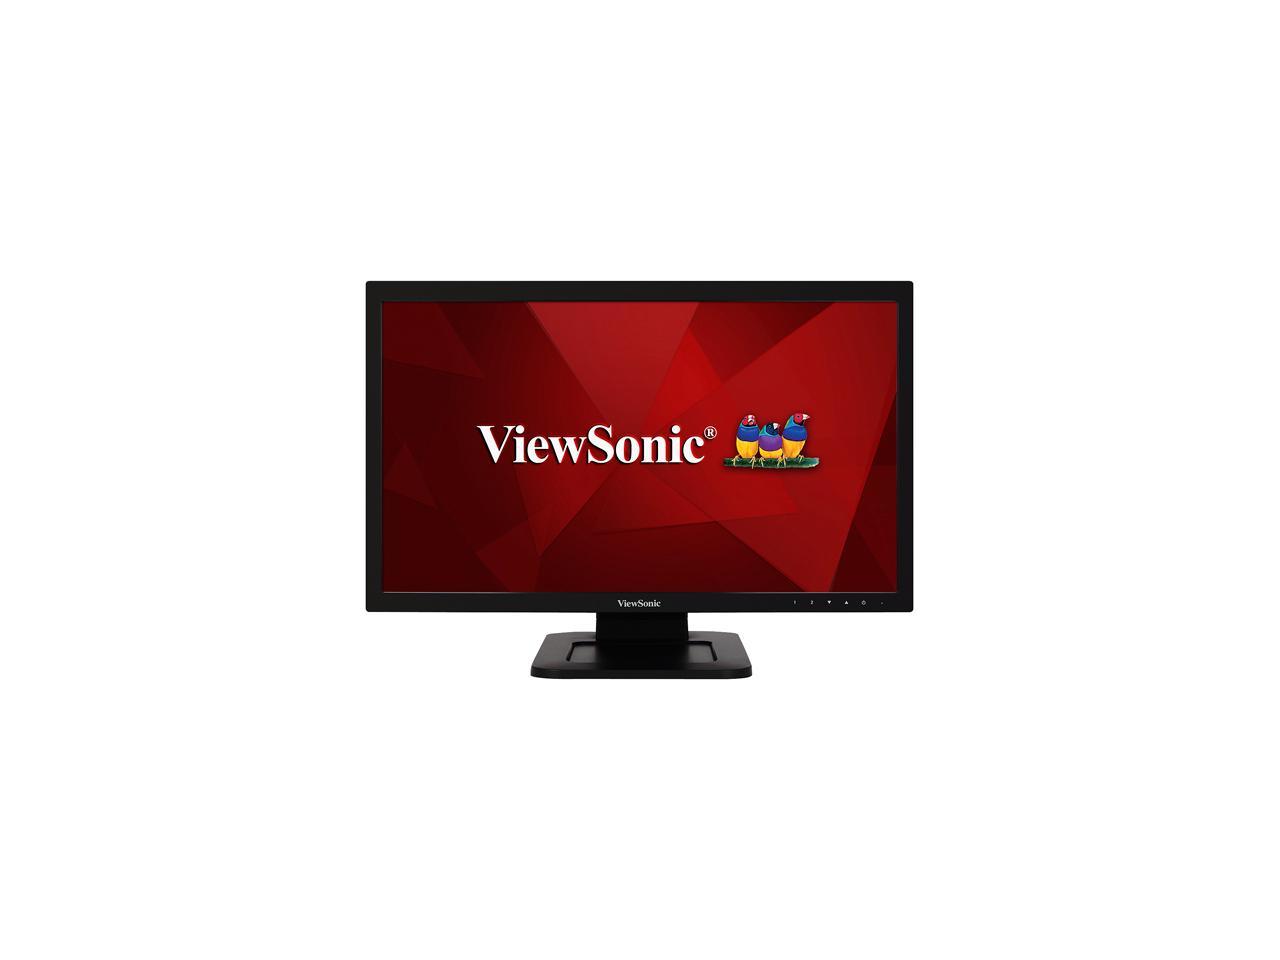 ViewSonic TD2210 22" TN Touch Monitor, 1920 x 1080, 20M:1 Contract Ratio, 350cd/m2, VESA Compatible 100 x 100 mm, 170/160 Viewing Angles, DisplayPort, HDMI&VGA, Build-in Speaker